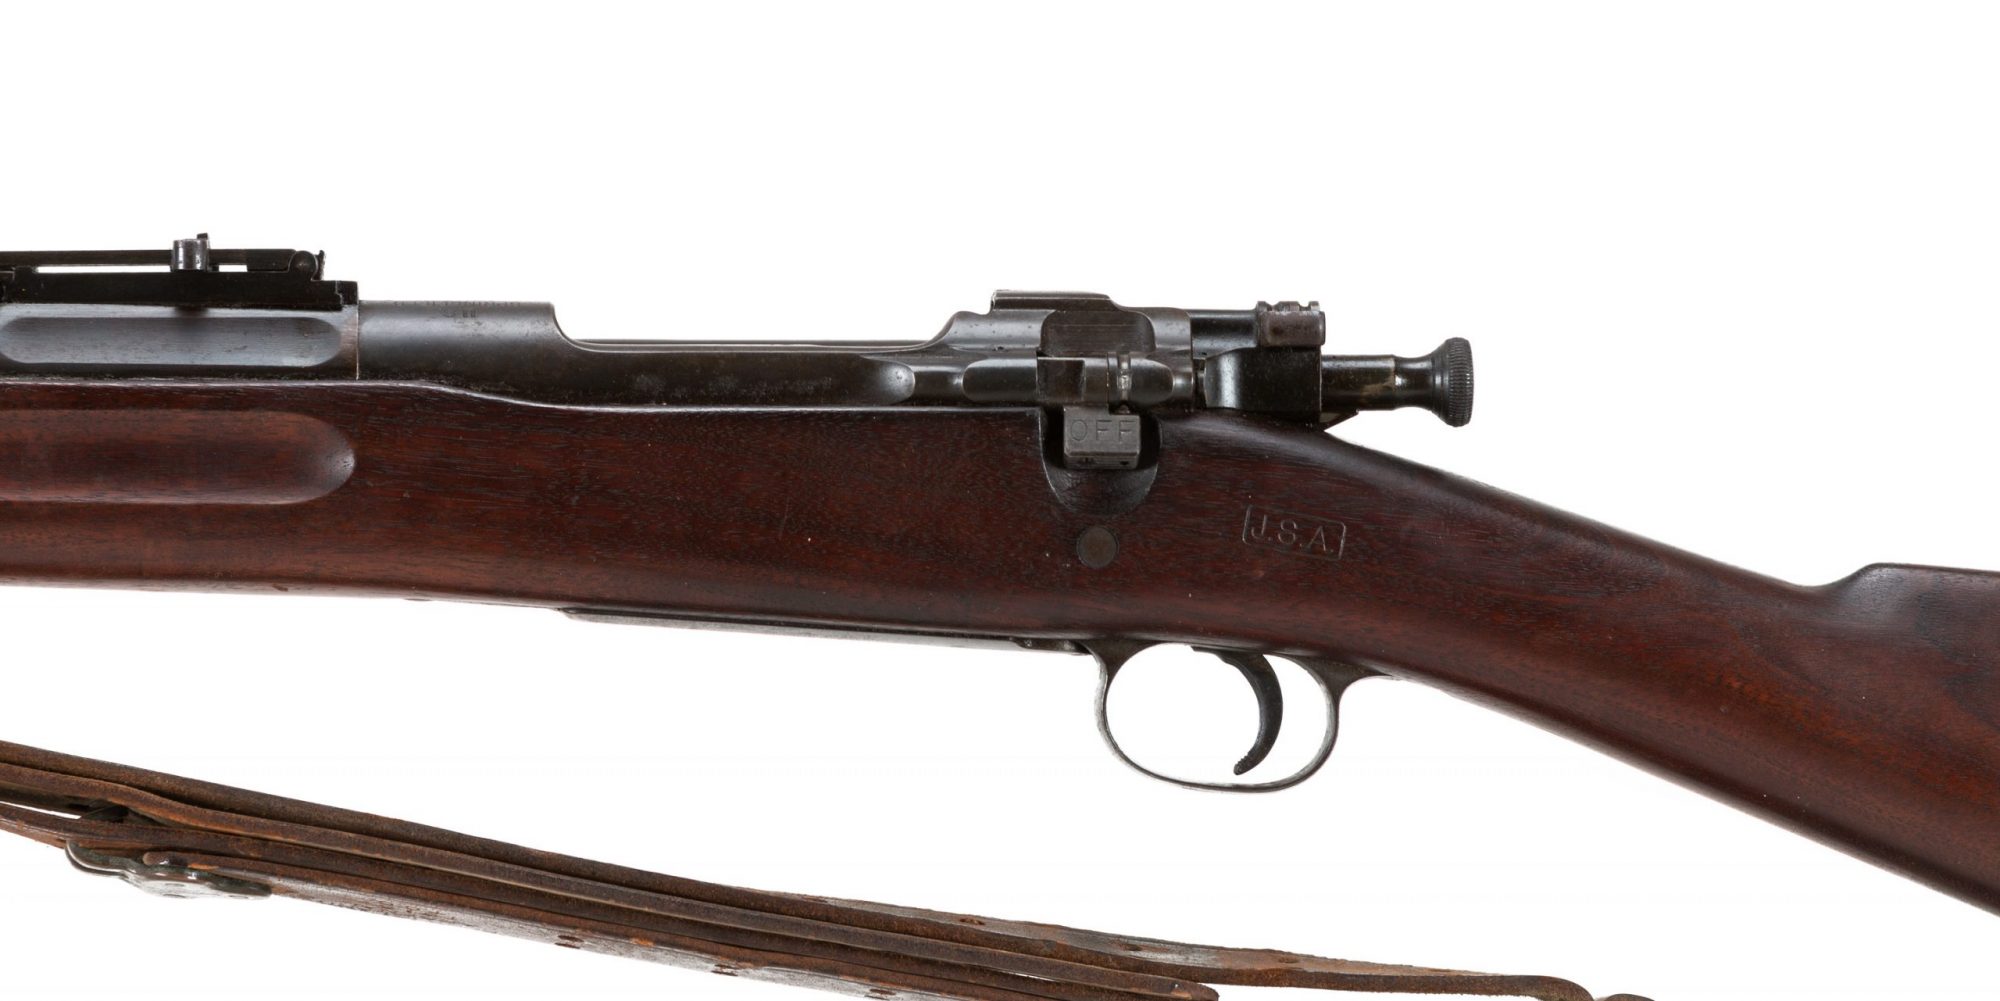 Photo of a pre-owned Springfield Model 1903, sold as-is by Turnbull Restoration